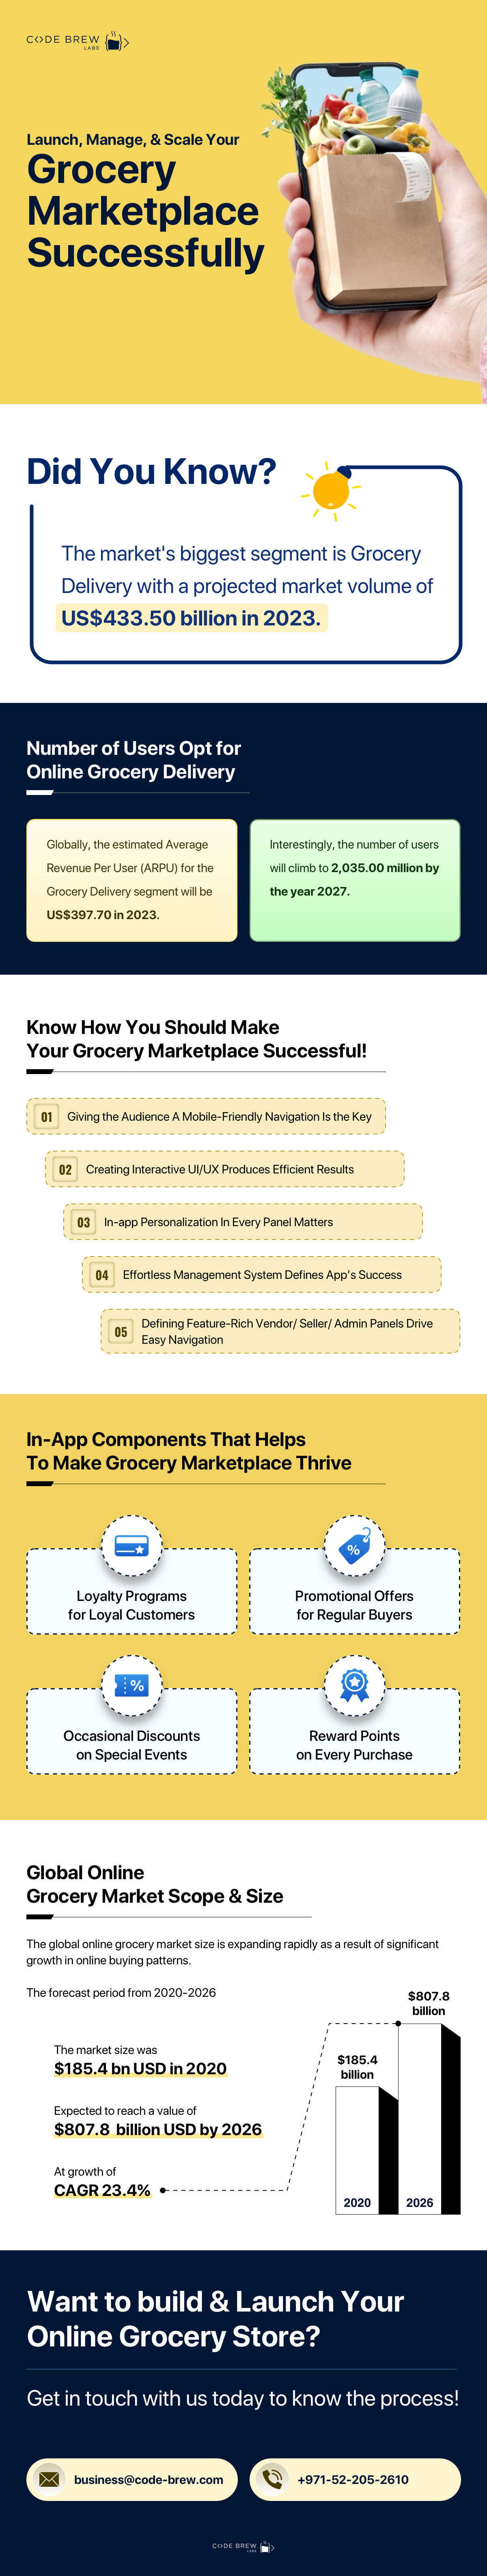 How To Make Your Grocery Marketplace Successful?